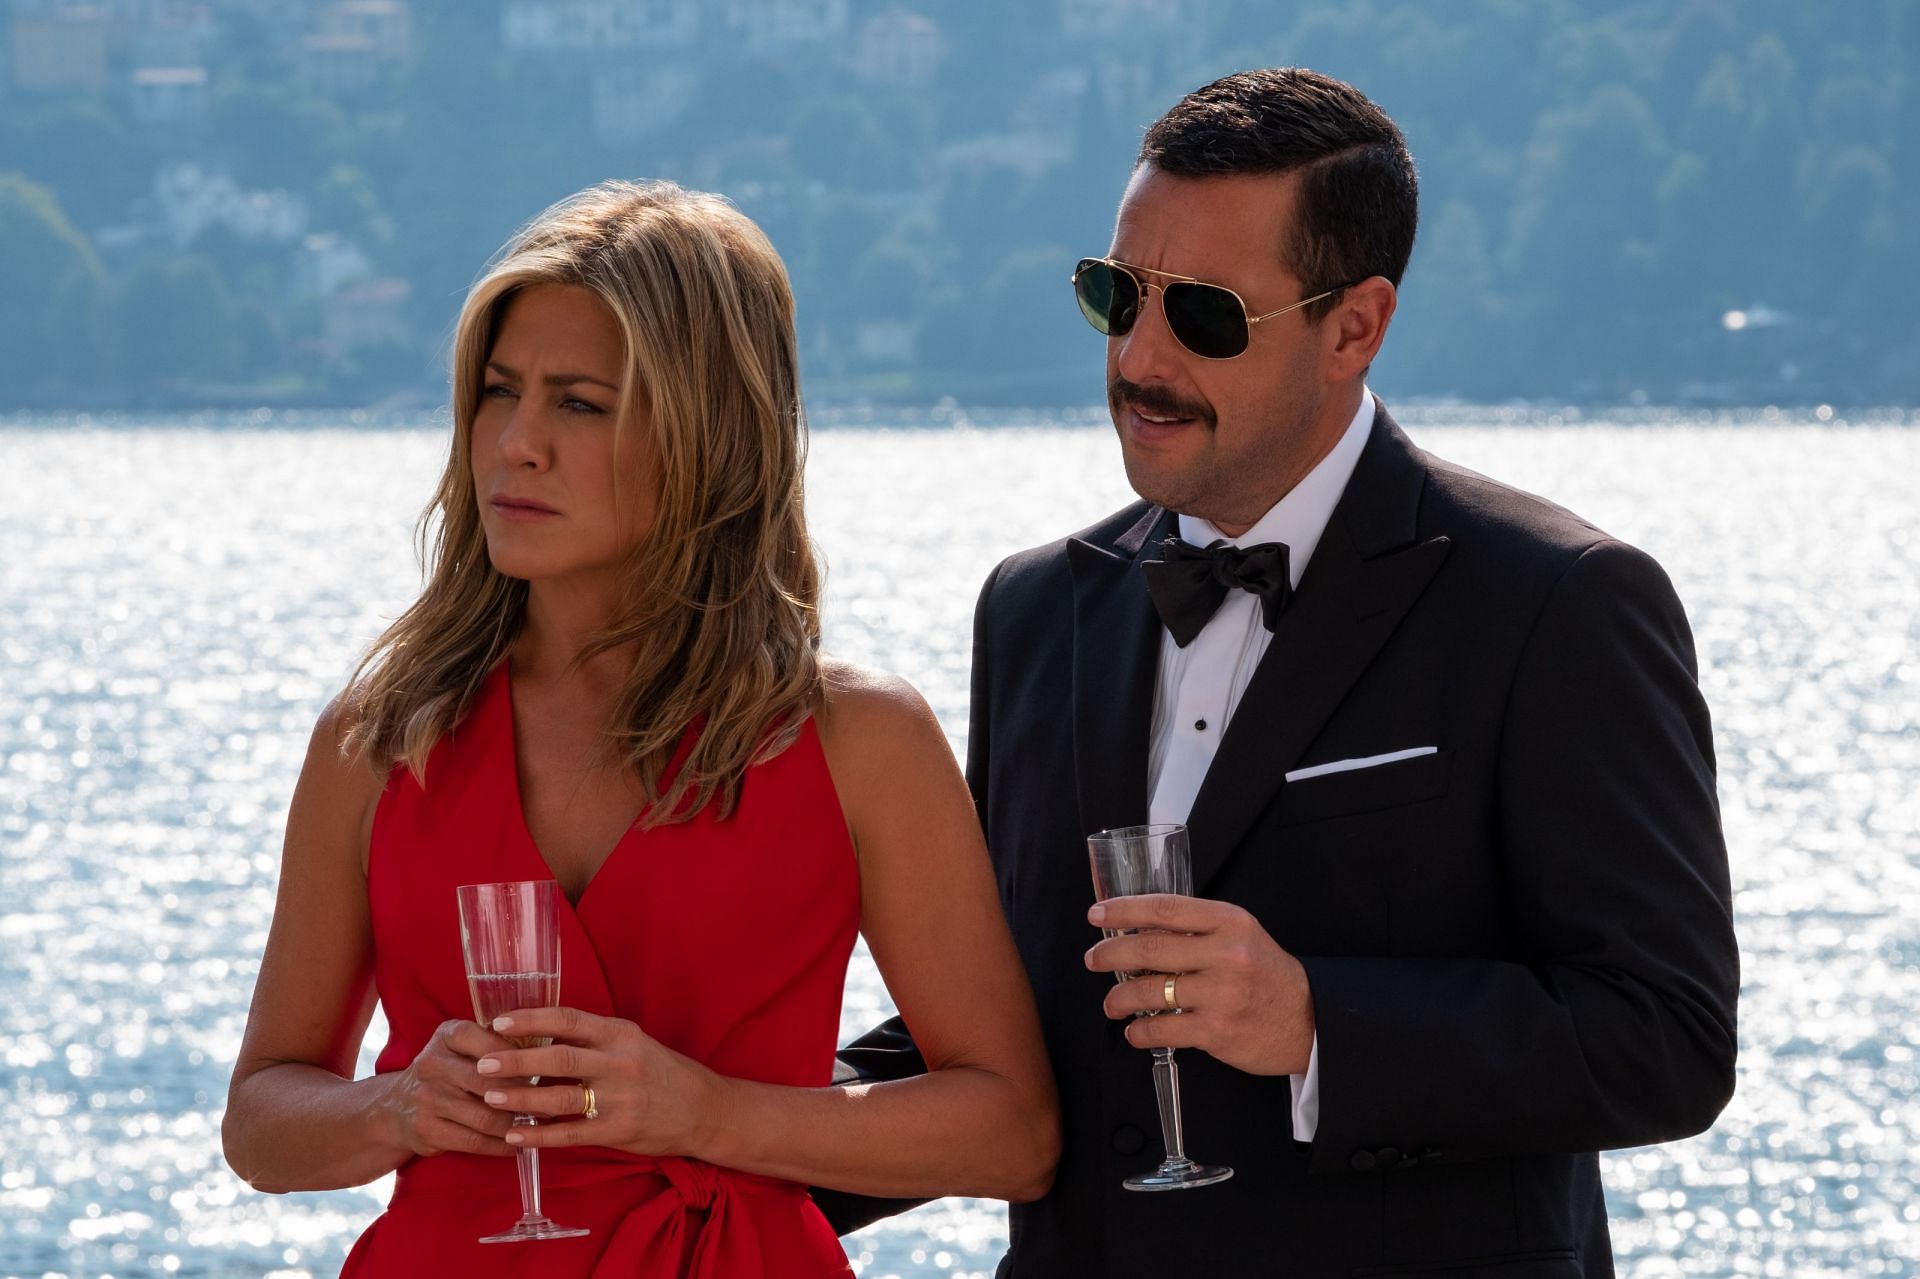 Get ready to solve another thrilling murder mystery with Adam Sandler and Jennifer Aniston in the highly-anticipated sequel, Murder Mystery 2 (Image via Netflix)